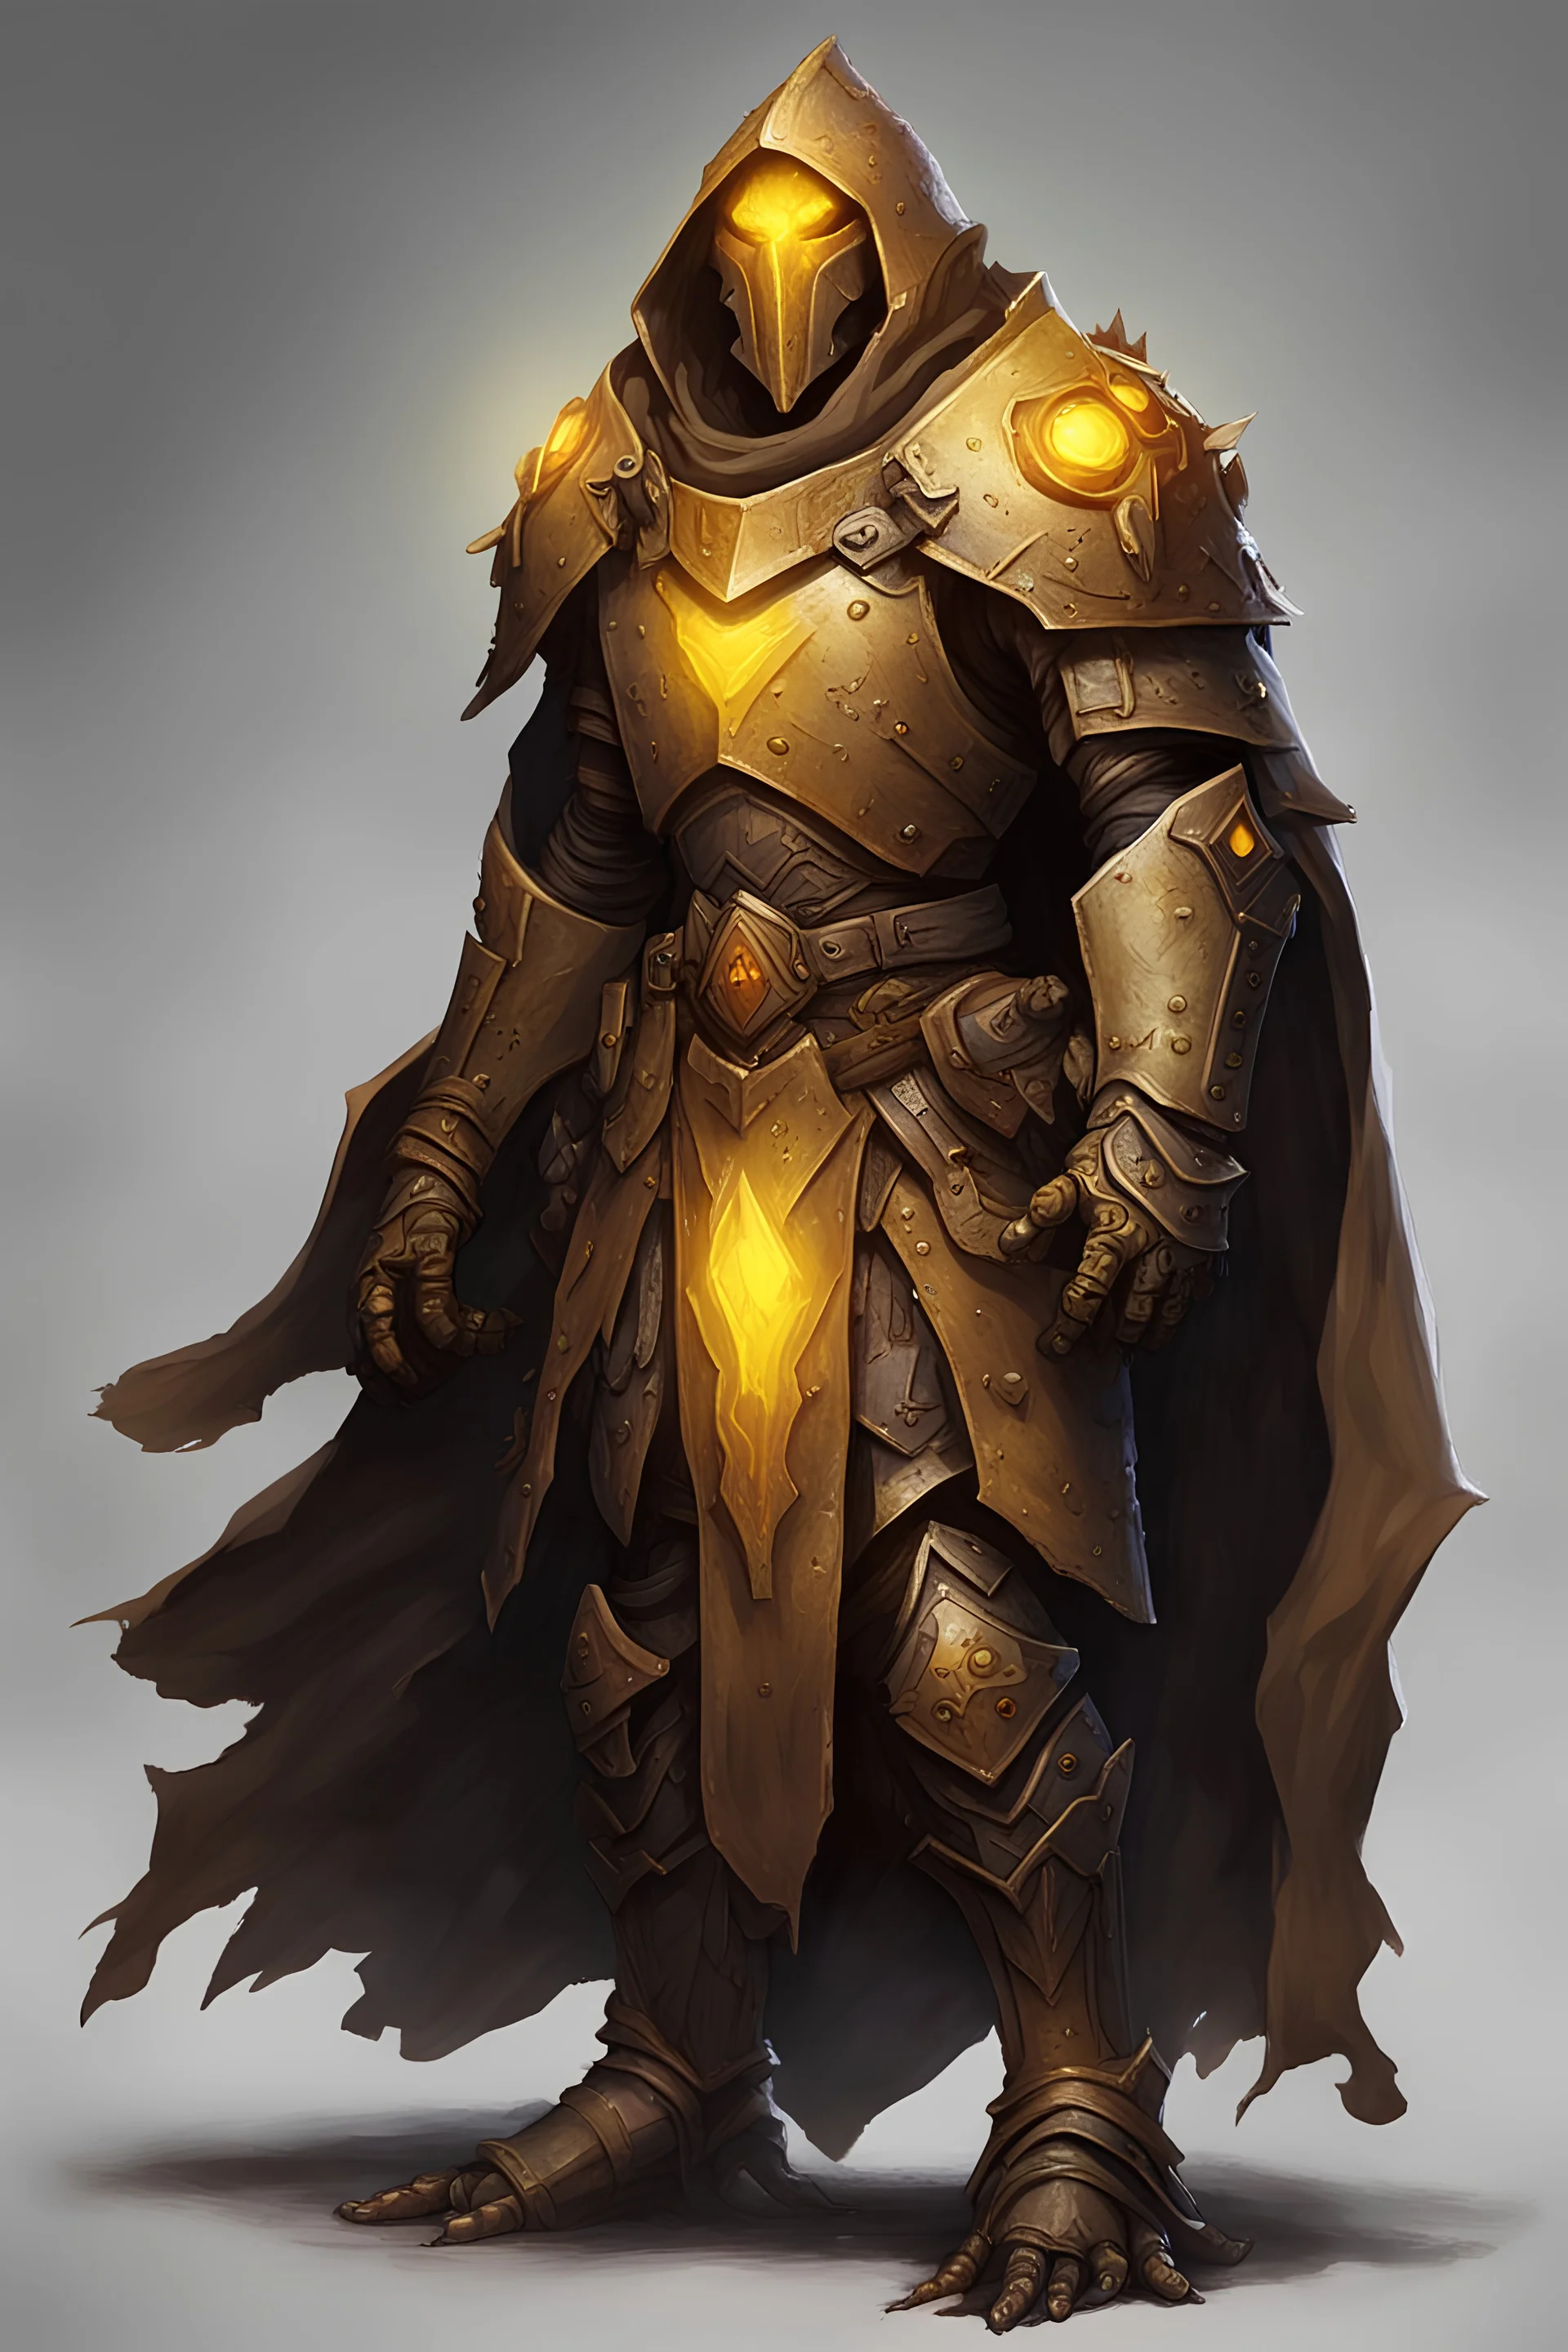 Copper Warforged, druid, glowing yellow eyes, wearing cloak, dungeons and dragons